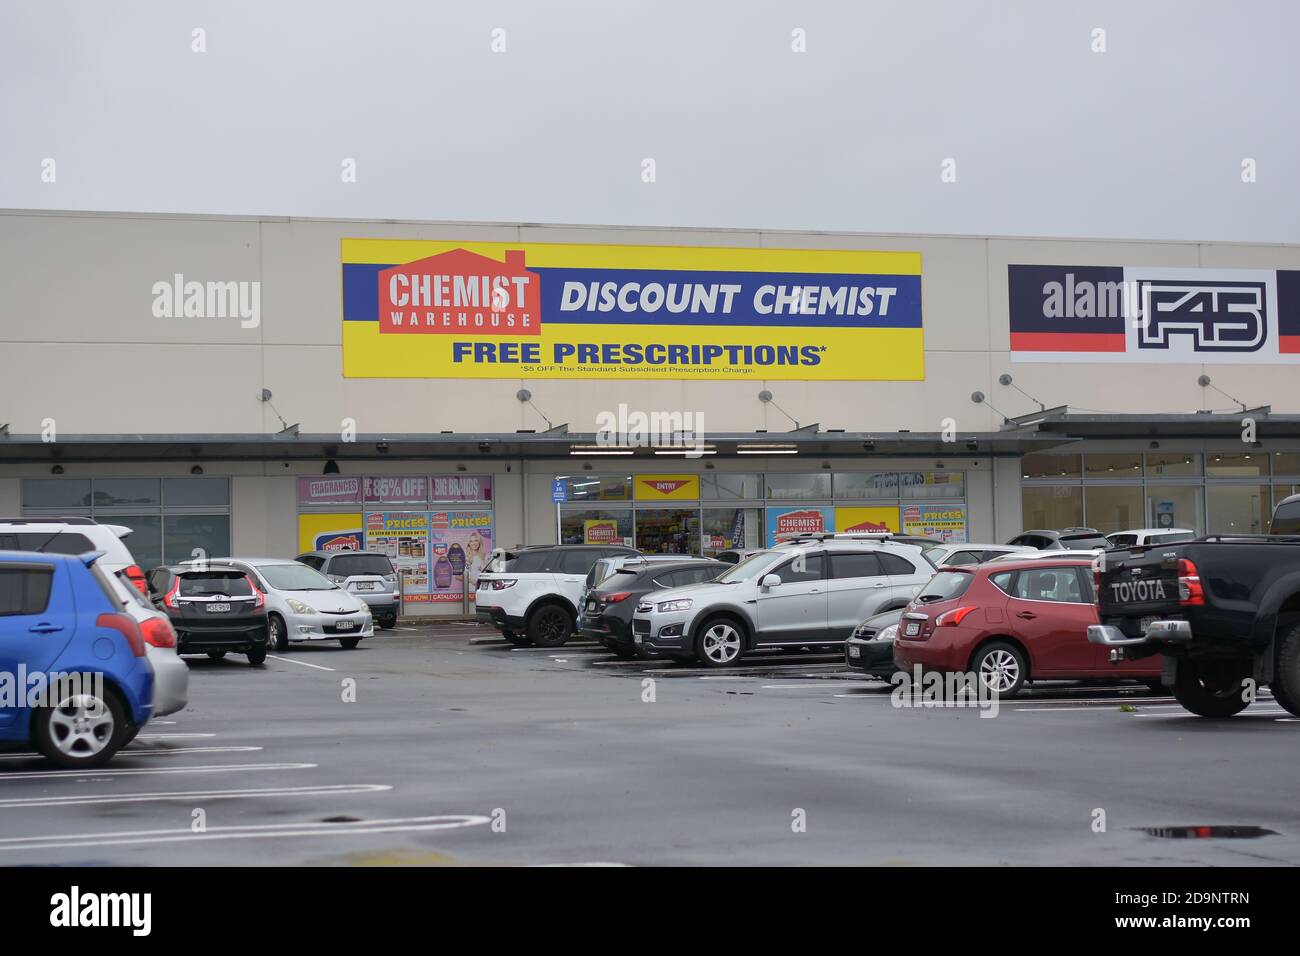 AUCKLAND, NEW ZEALAND - Nov 05, 2020: View of Chemist Warehouse discount pharmacy in Botany Town Centre Stock Photo